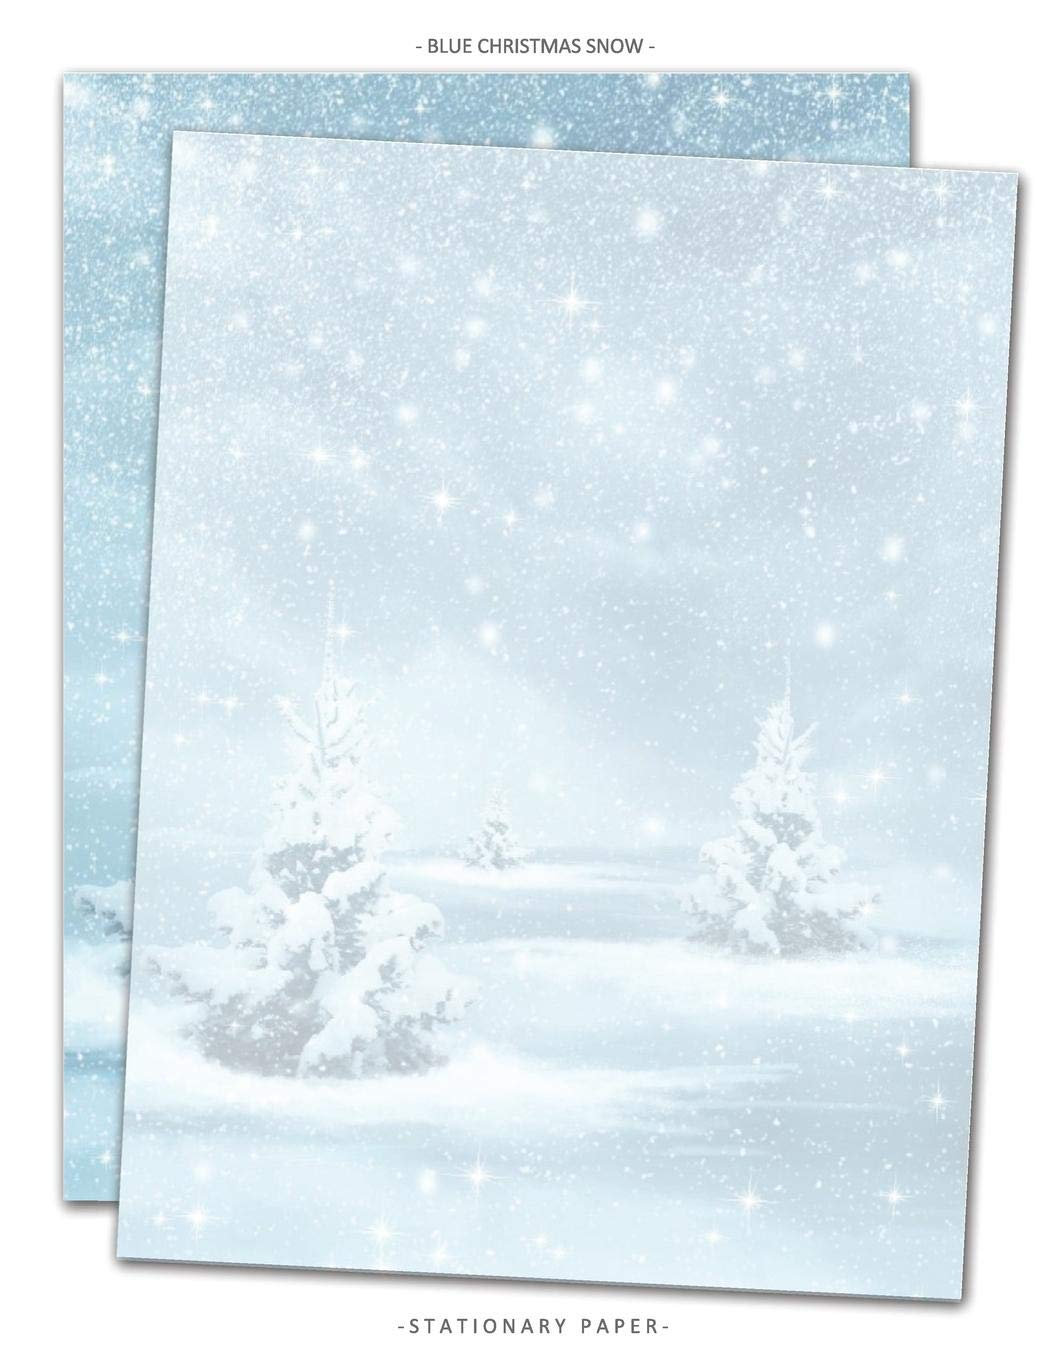 Blue Christmas Snow Stationary Paper: Snowflake Themed Letterhead Paper, Set of 25 Sheets for Writing, Flyers, Copying, Crafting, Invitations, Party, (Stationery #21)